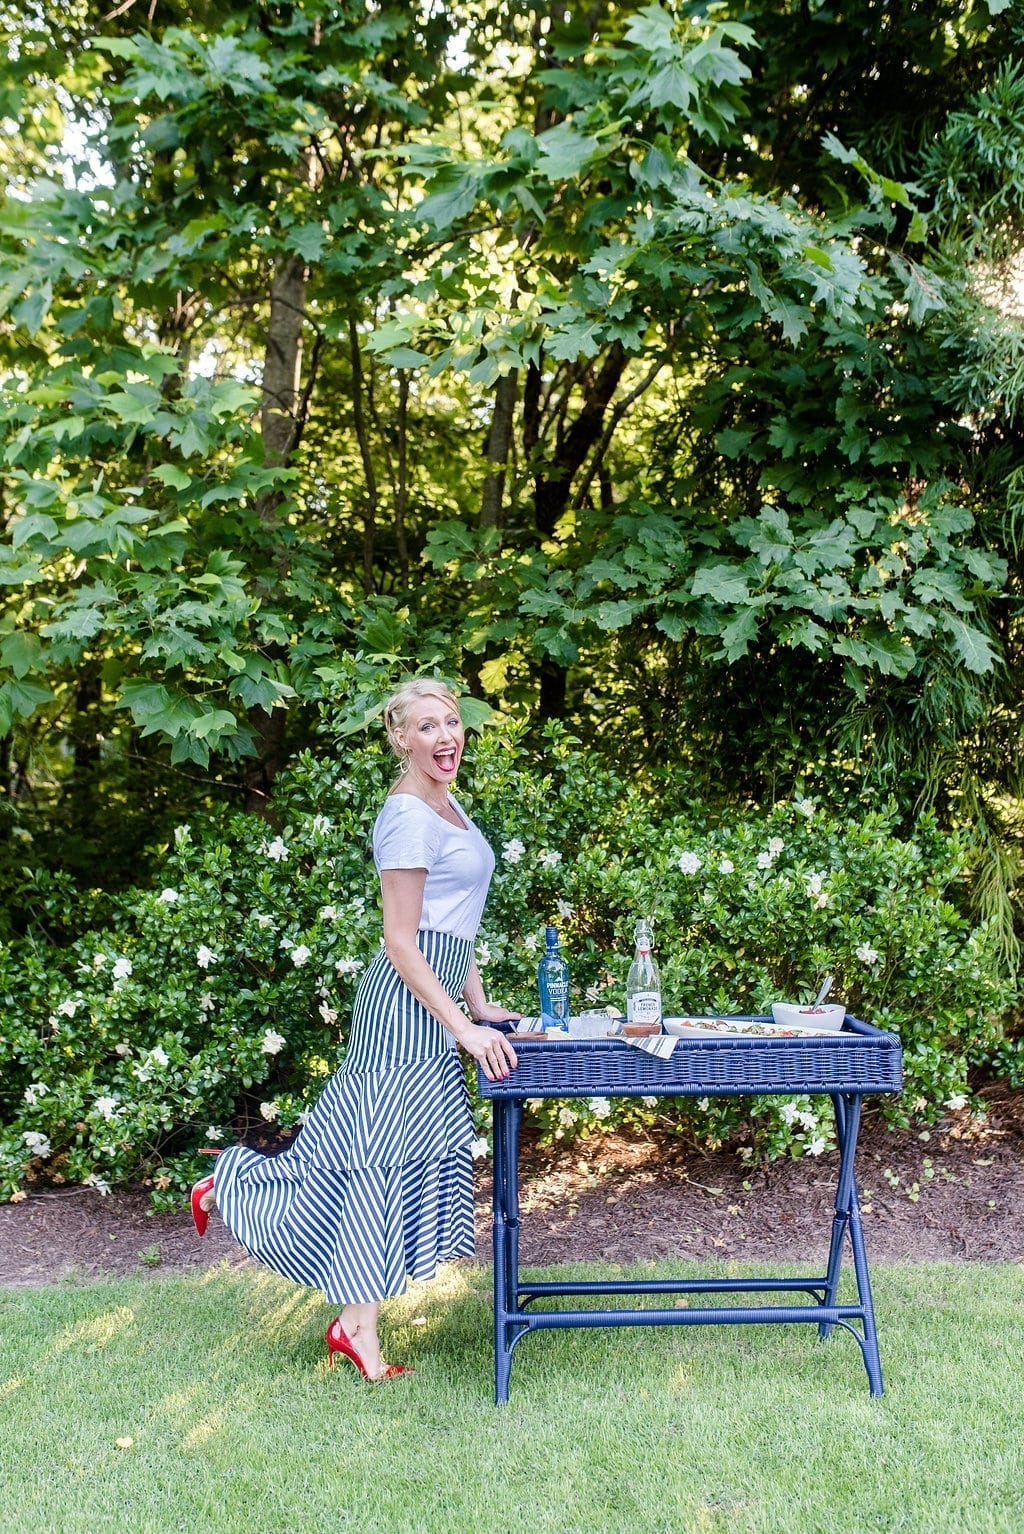 Outdoor entertaining tips from lifestyle blogger, bluegraygal. Gardenia bush and blue bar cart with Pinnacle Vodka.